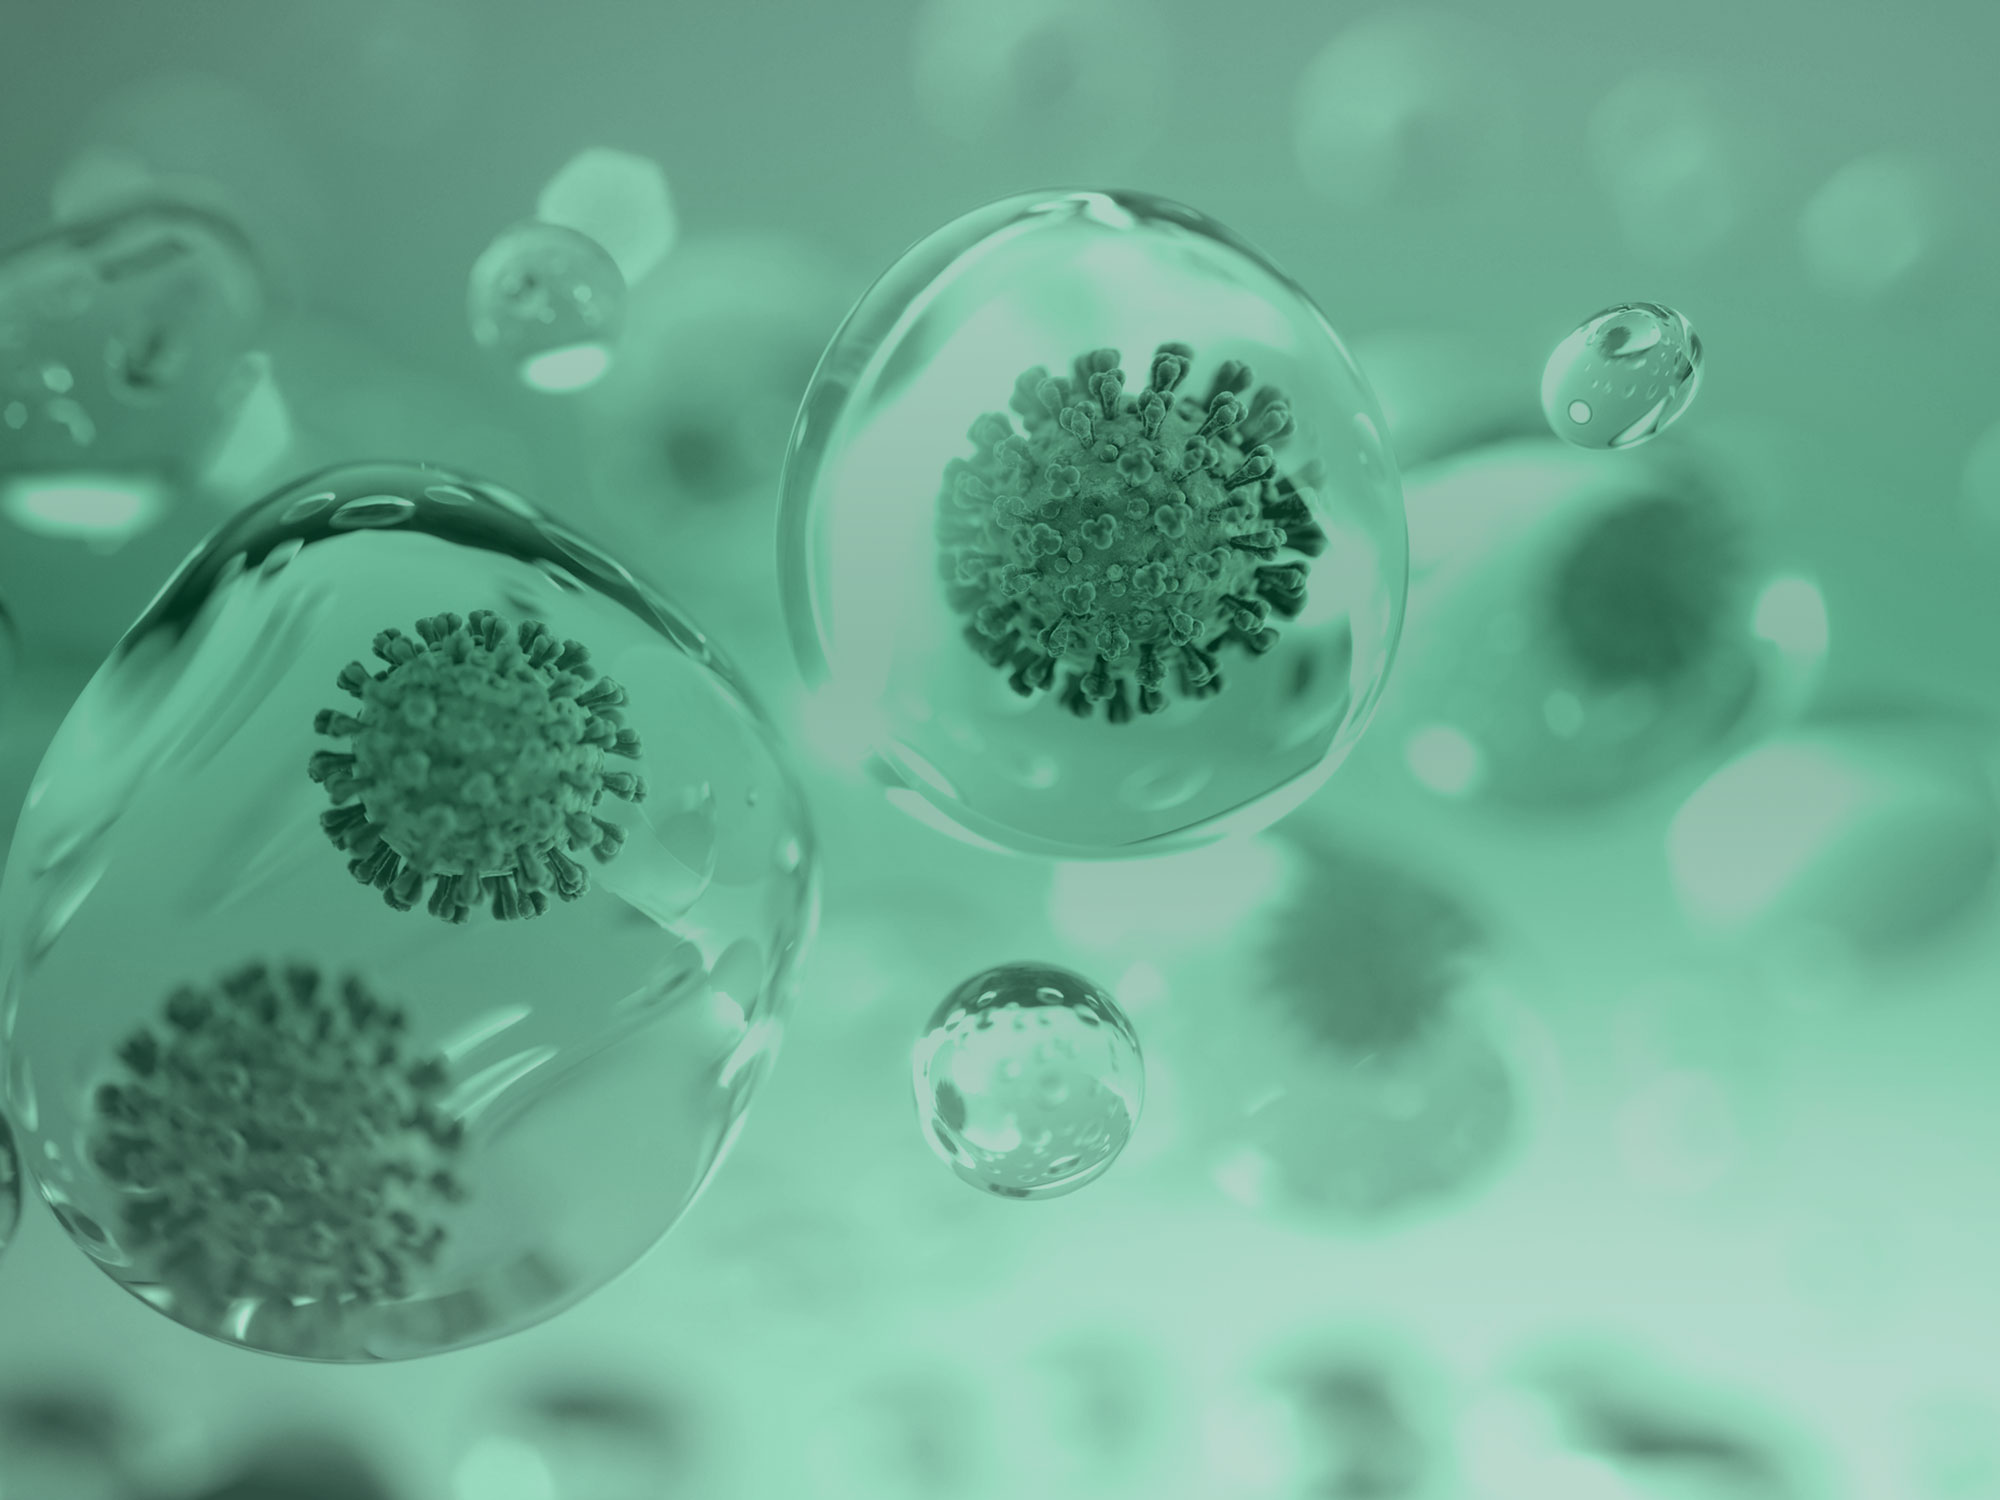 Determining if antiviral/antimicrobial filters are effective in capturing viruses and bacteria